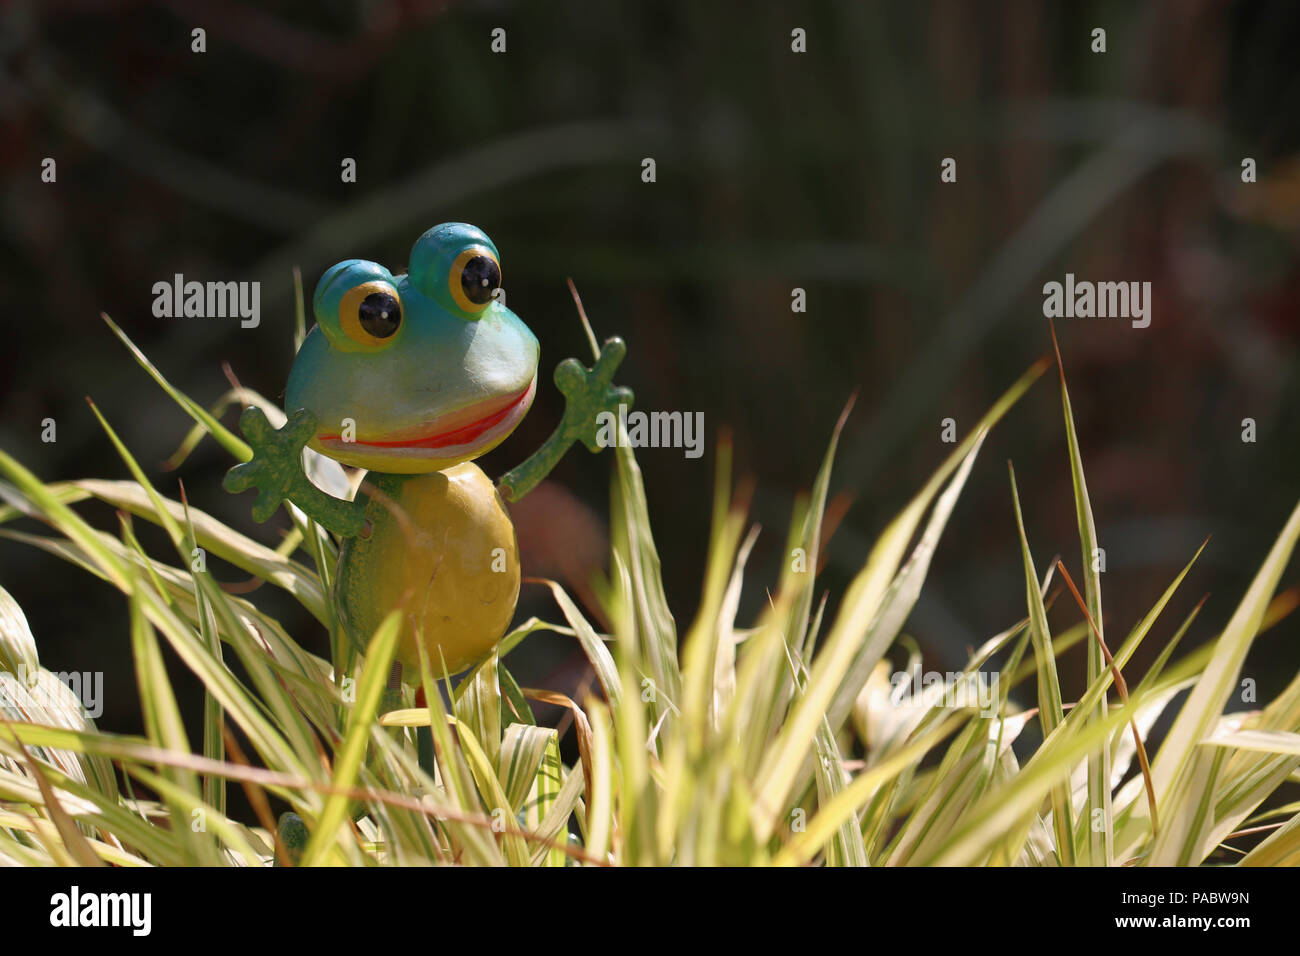 A plastic garden ornament that looks like a characterised frog Stock Photo